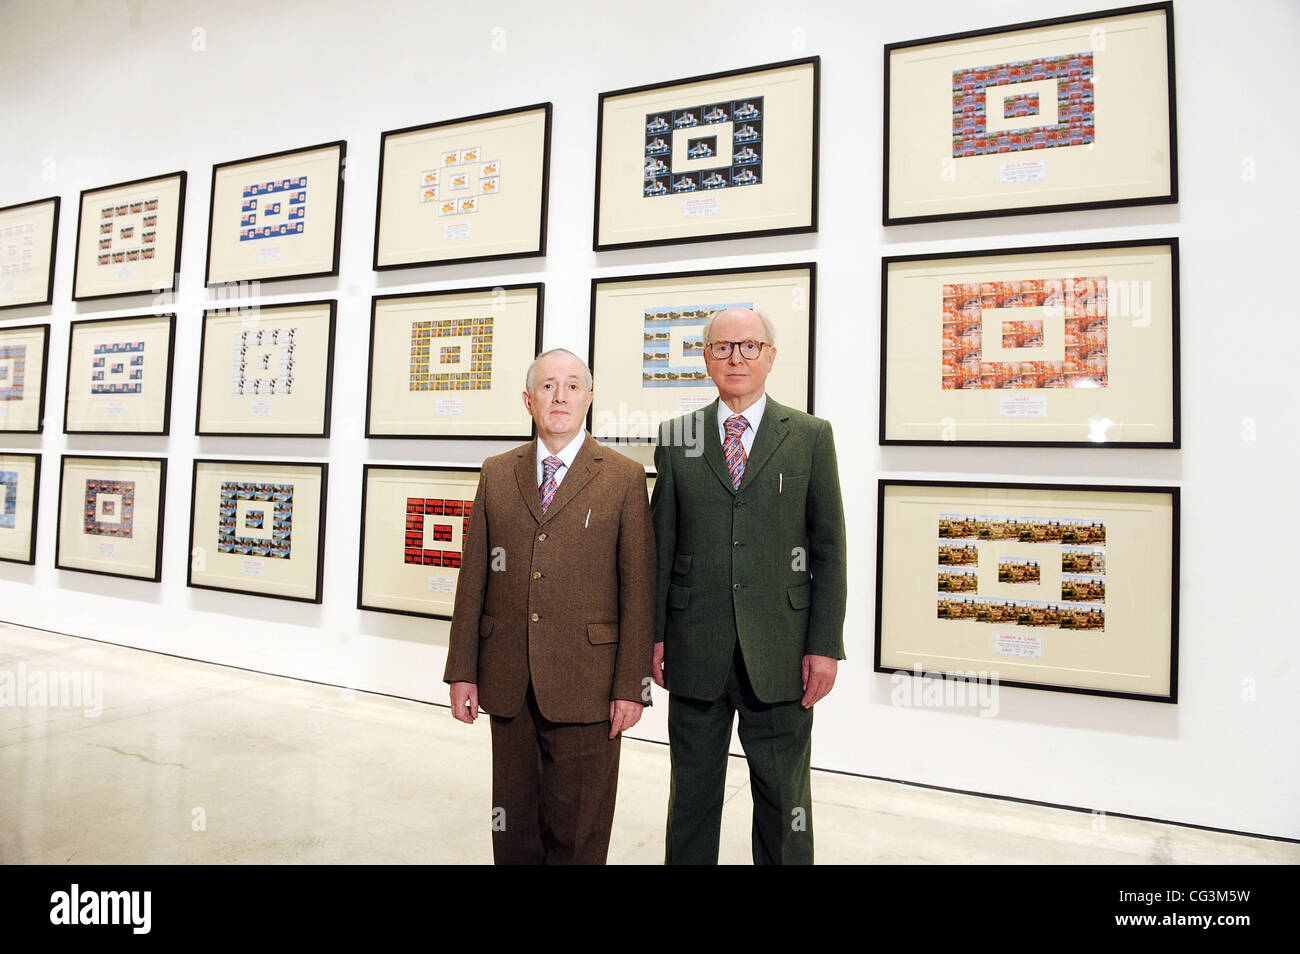 Gilbert Proesch and George Passmore  British artists and double act Gilbert and George at the press view of their new exhibition at White Cube London, England- 12.01.11 Stock Photo